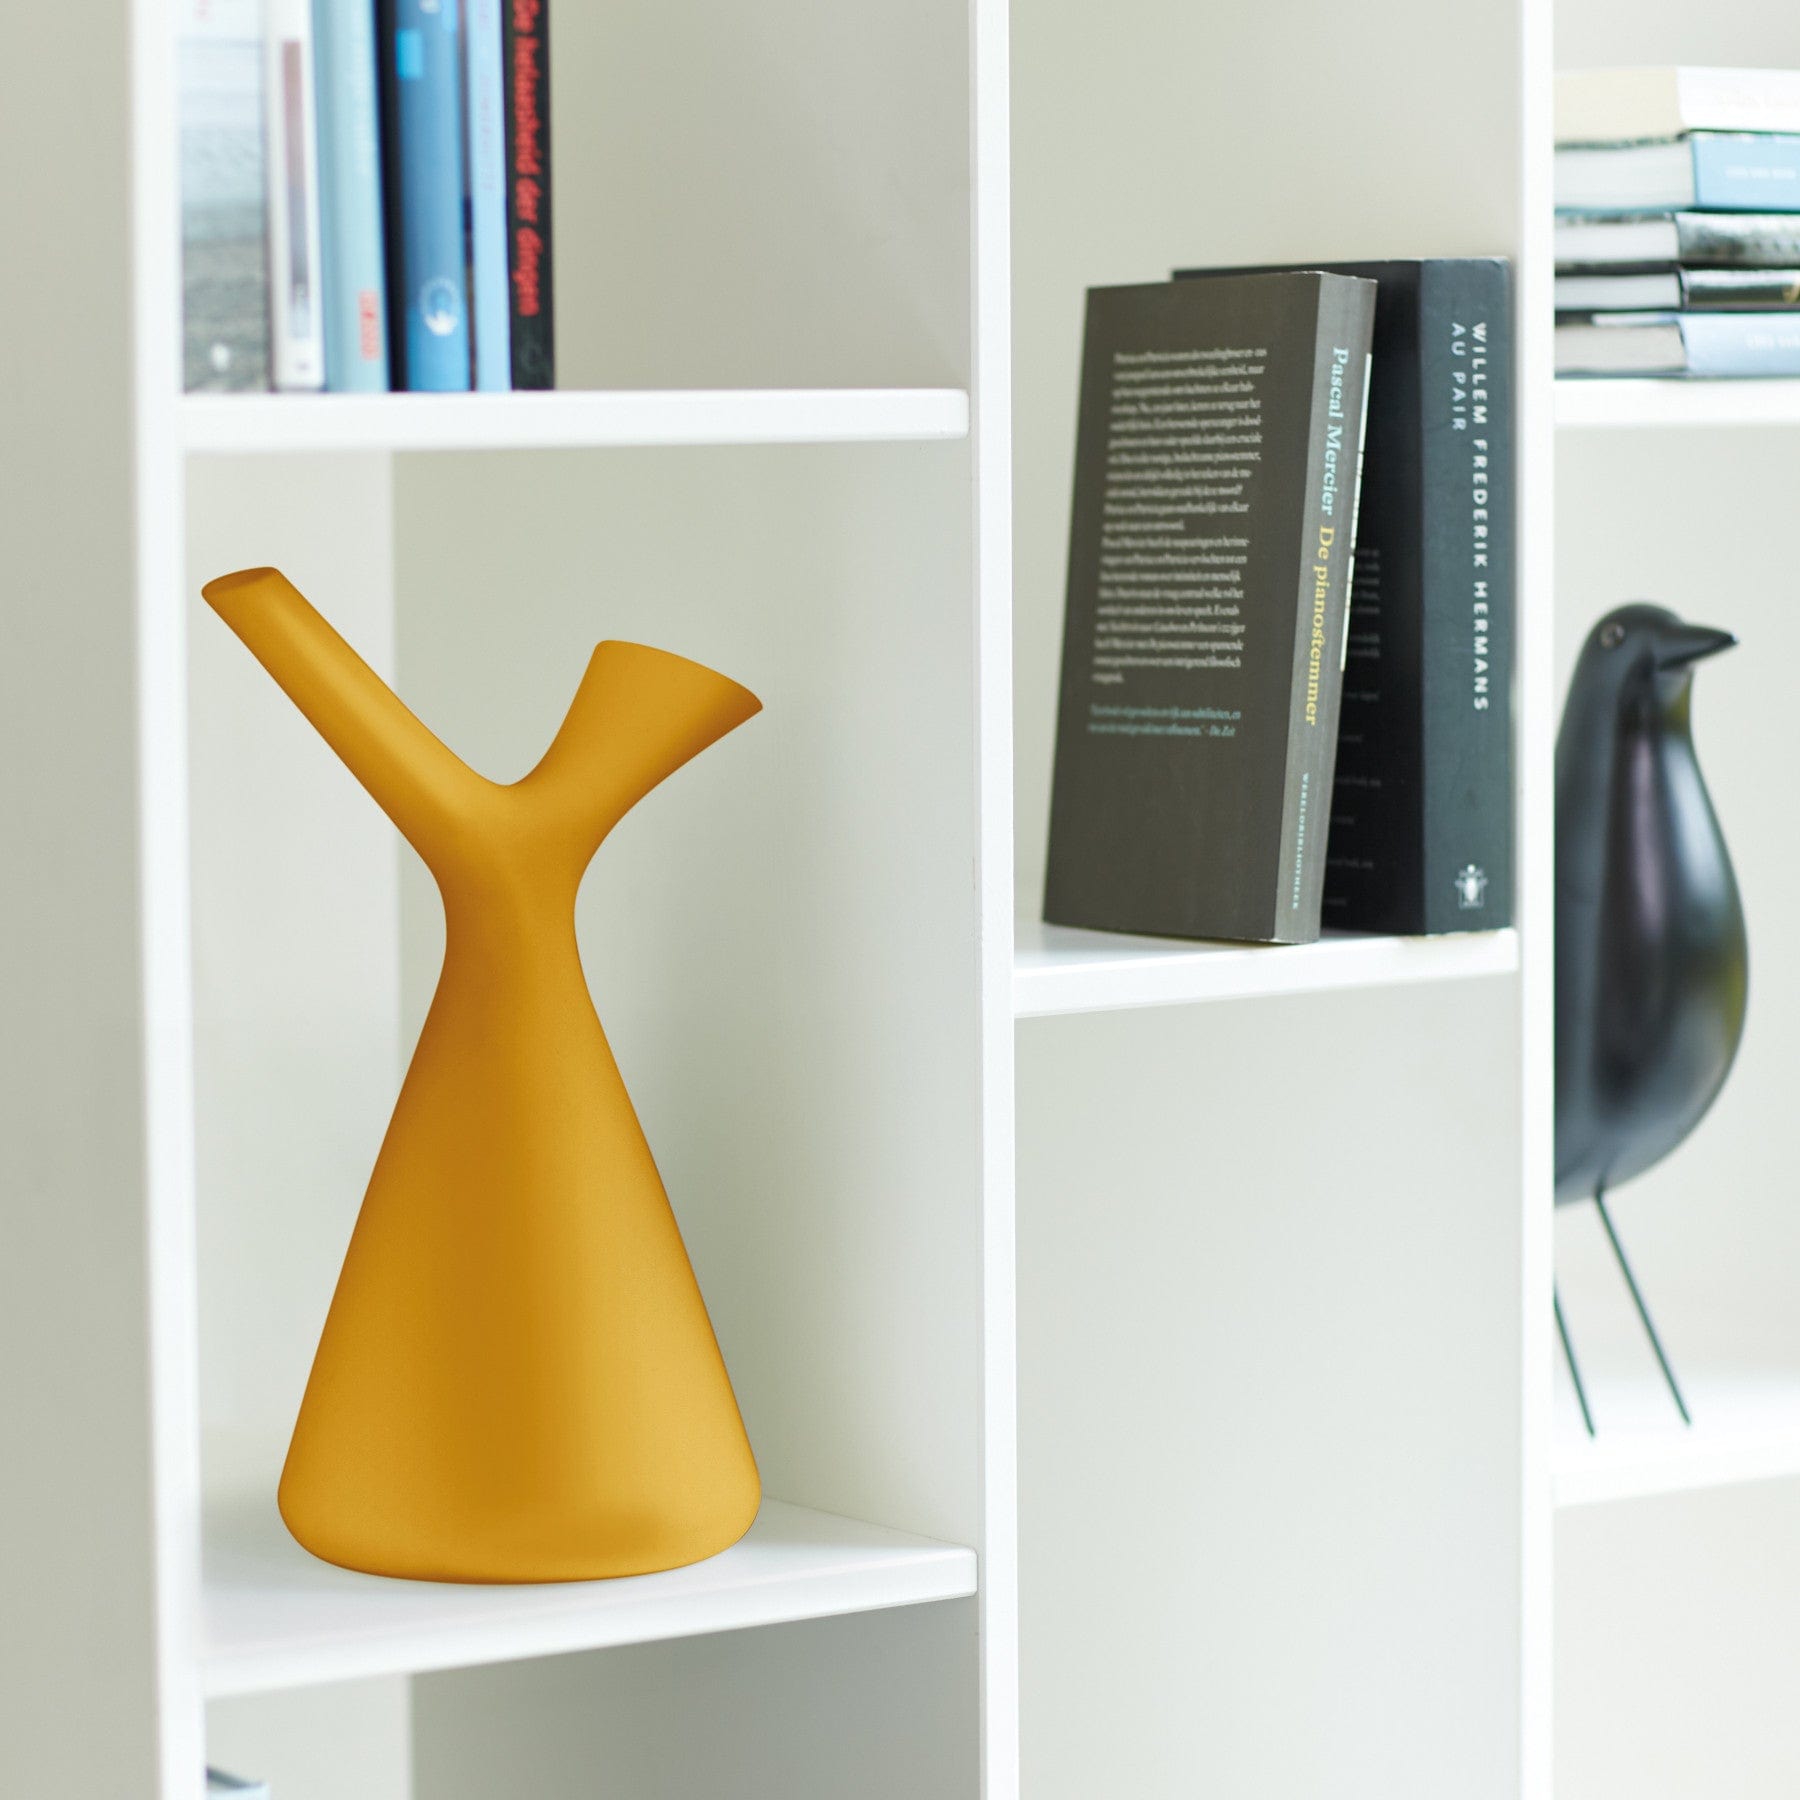 Modern yellow vase on white bookshelf with assorted books and decorative black bird figurine in a bright interior.